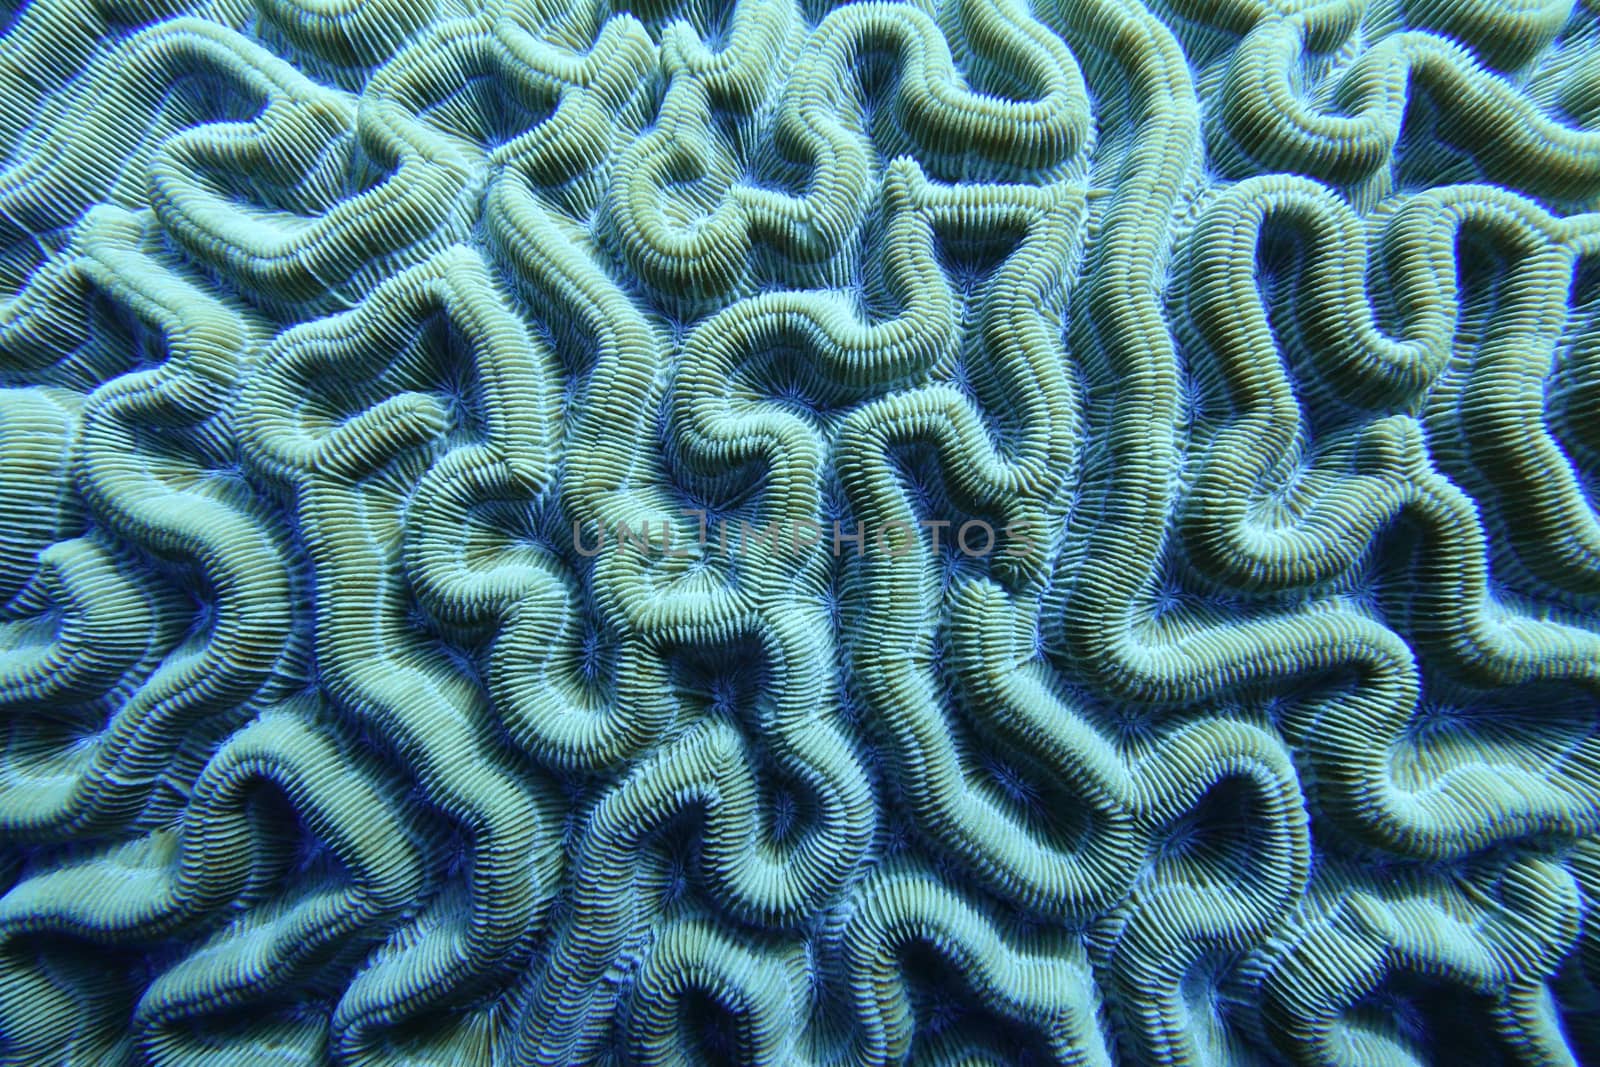 An underwater photo of coral. Corals are marine invertebrates within the class Anthozoa of the phylum Cnidaria. They typically live in compact colonies of many identical individual polyps